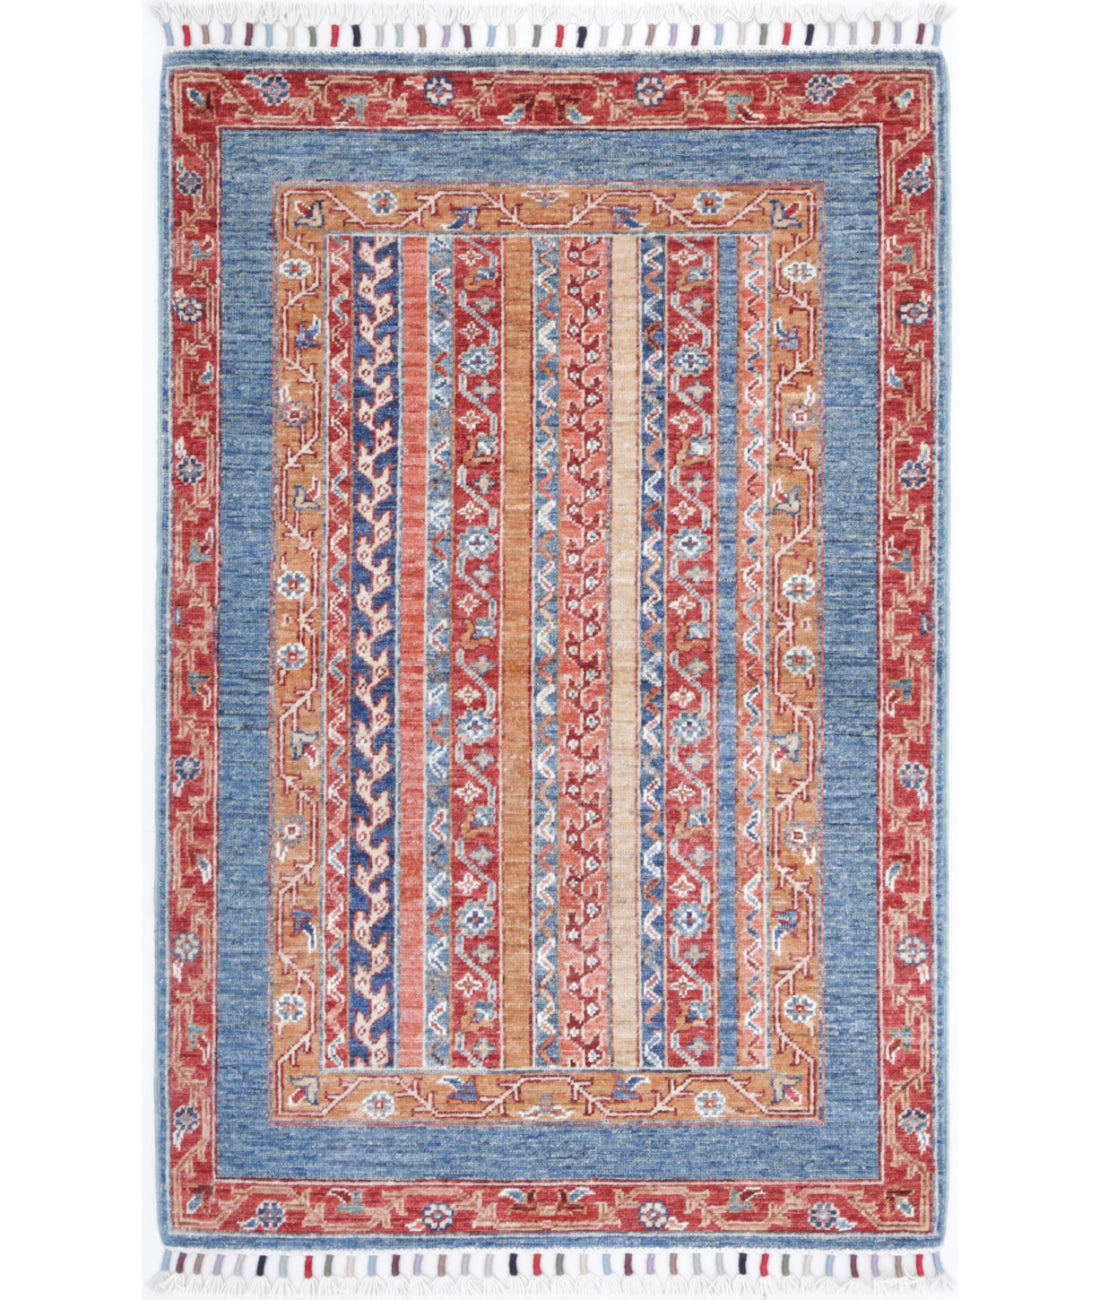 Hand Knotted Shaal Wool Rug - 2'7'' x 3'11'' 2'7'' x 3'11'' (78 X 118) / Multi / Multi